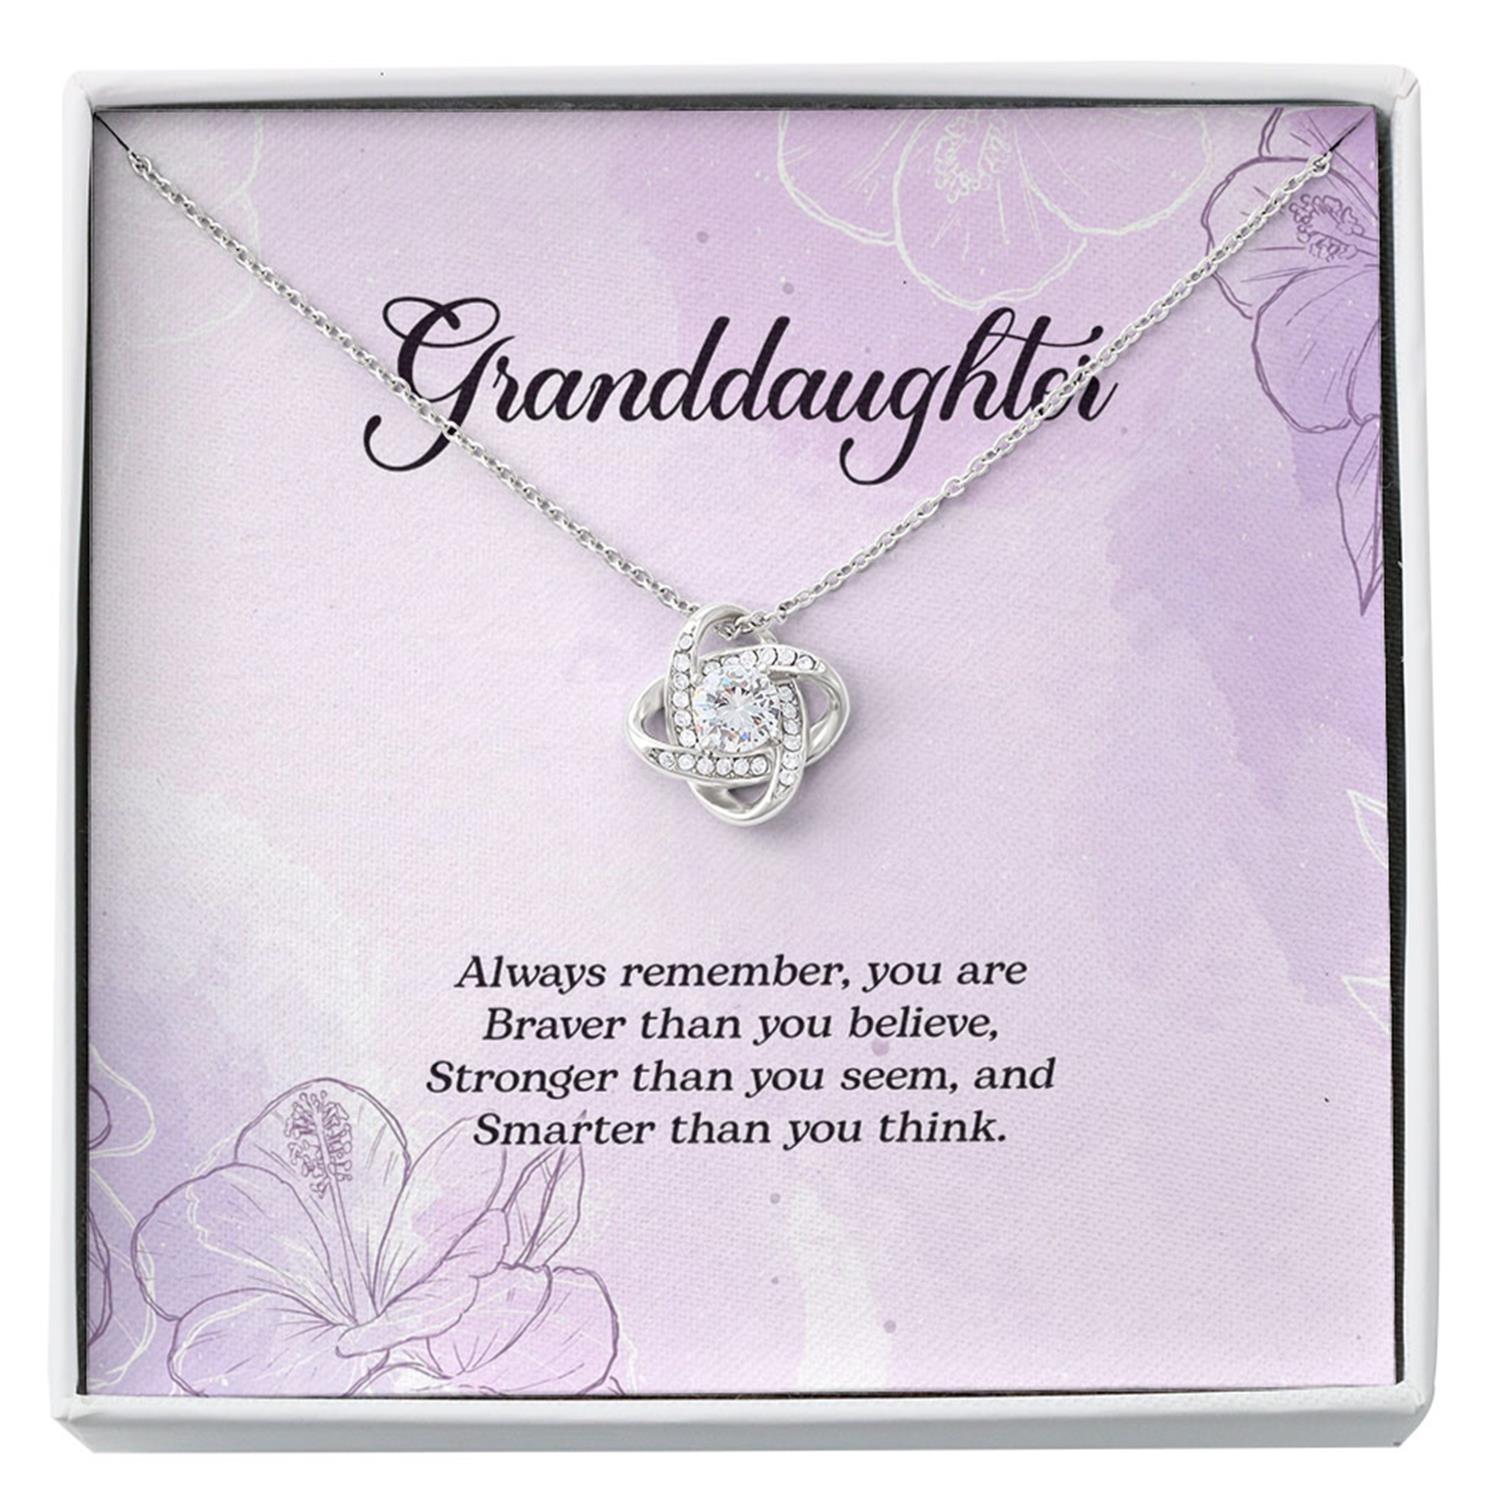 Granddaughter Necklace - Gifts From Grandmother Or Grandfather Custom Necklace